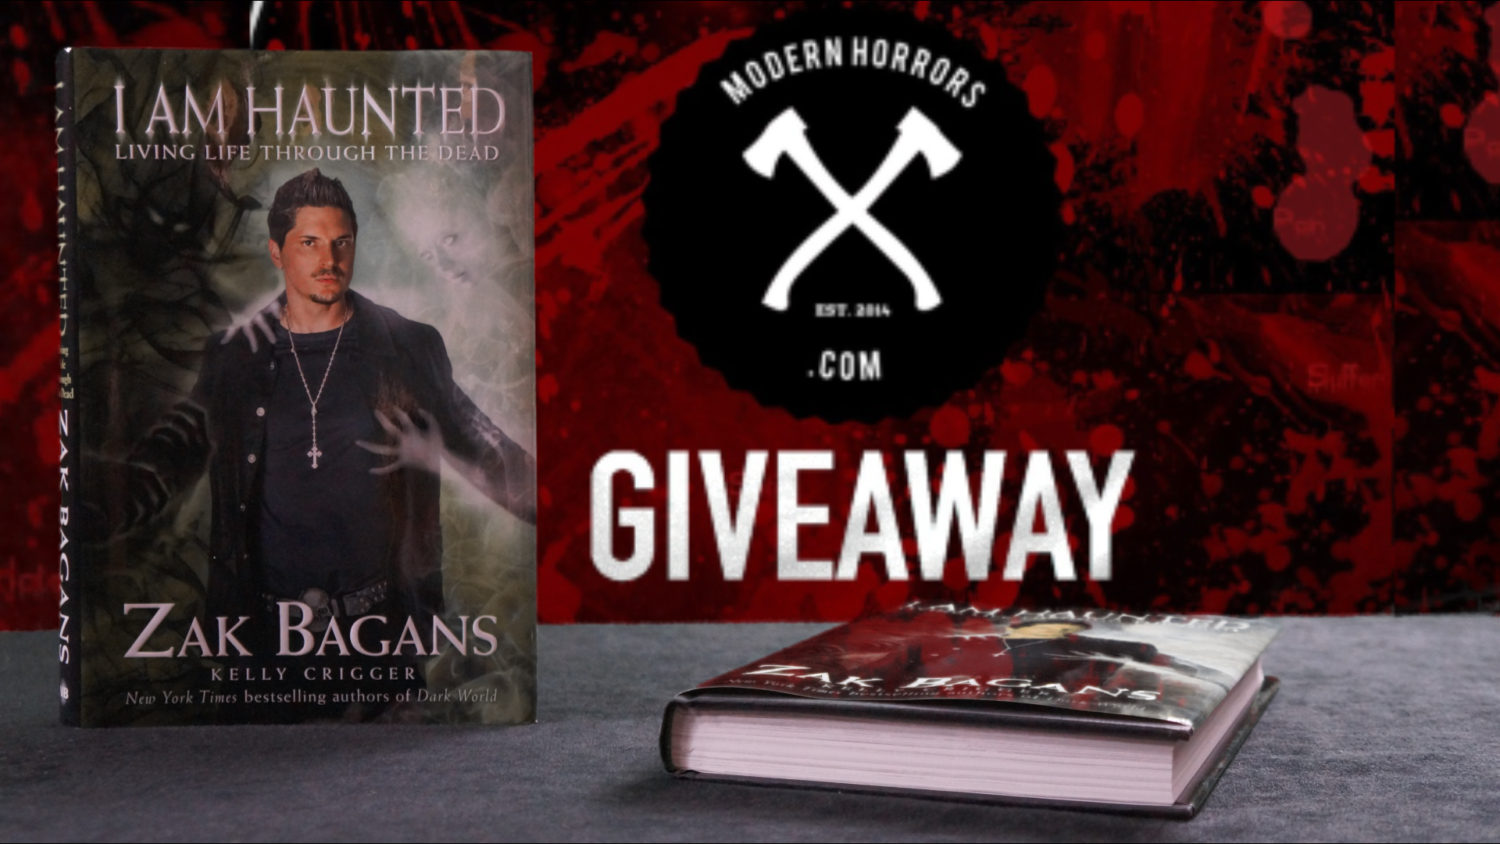 Win one of two copies of Zak Bagan's new book - I Am Haunted